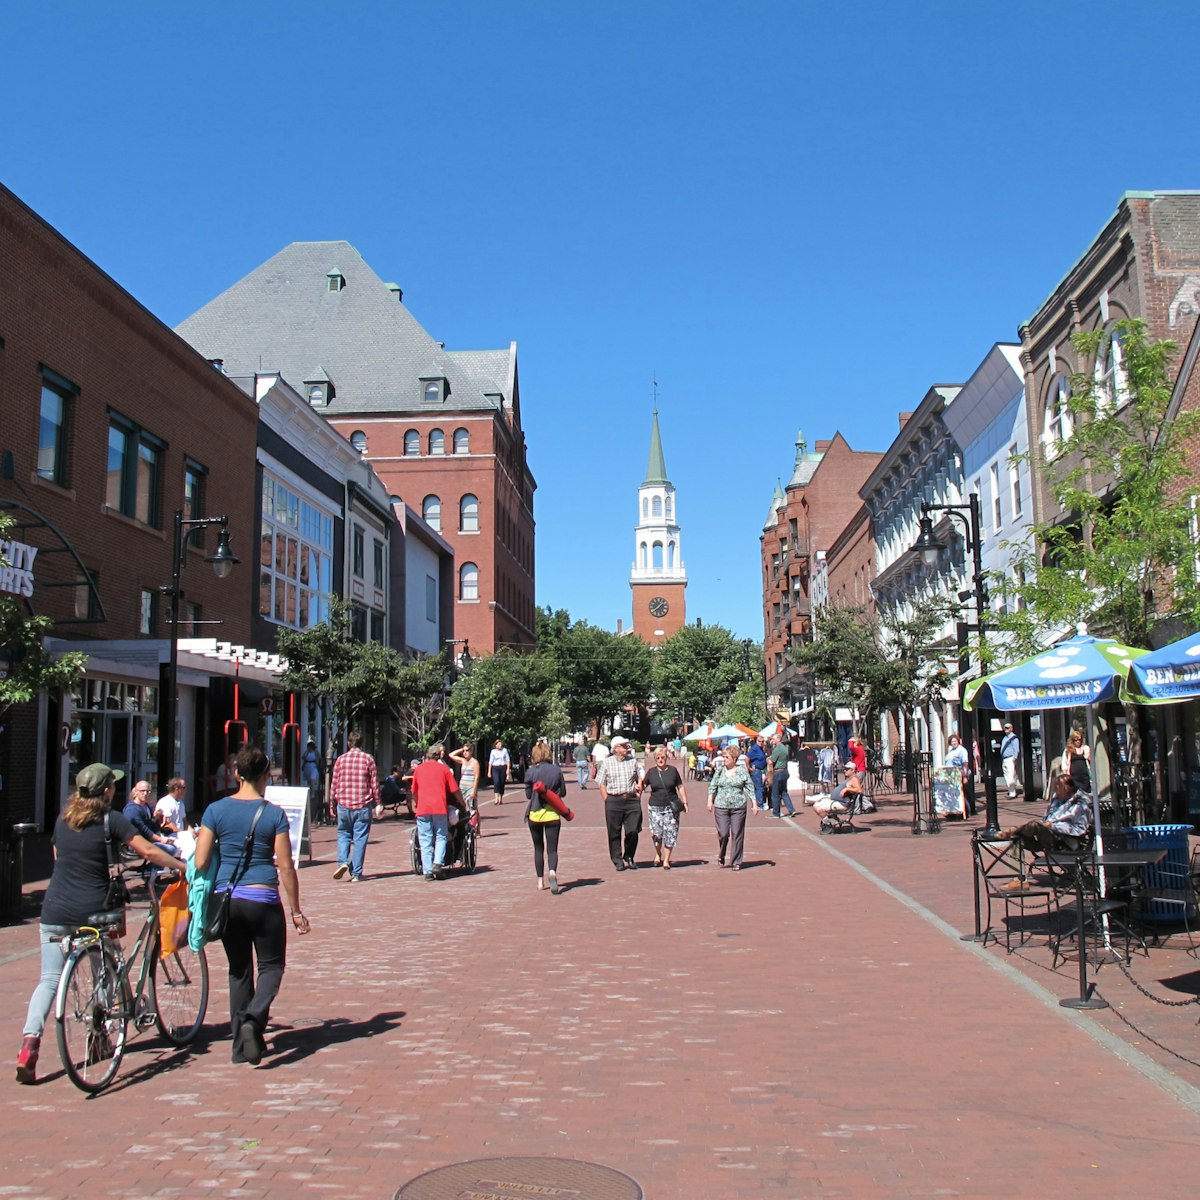 People enjoy Church street in Burlington, Vermont. (Photo by: Education Images/UIG via Getty Images)